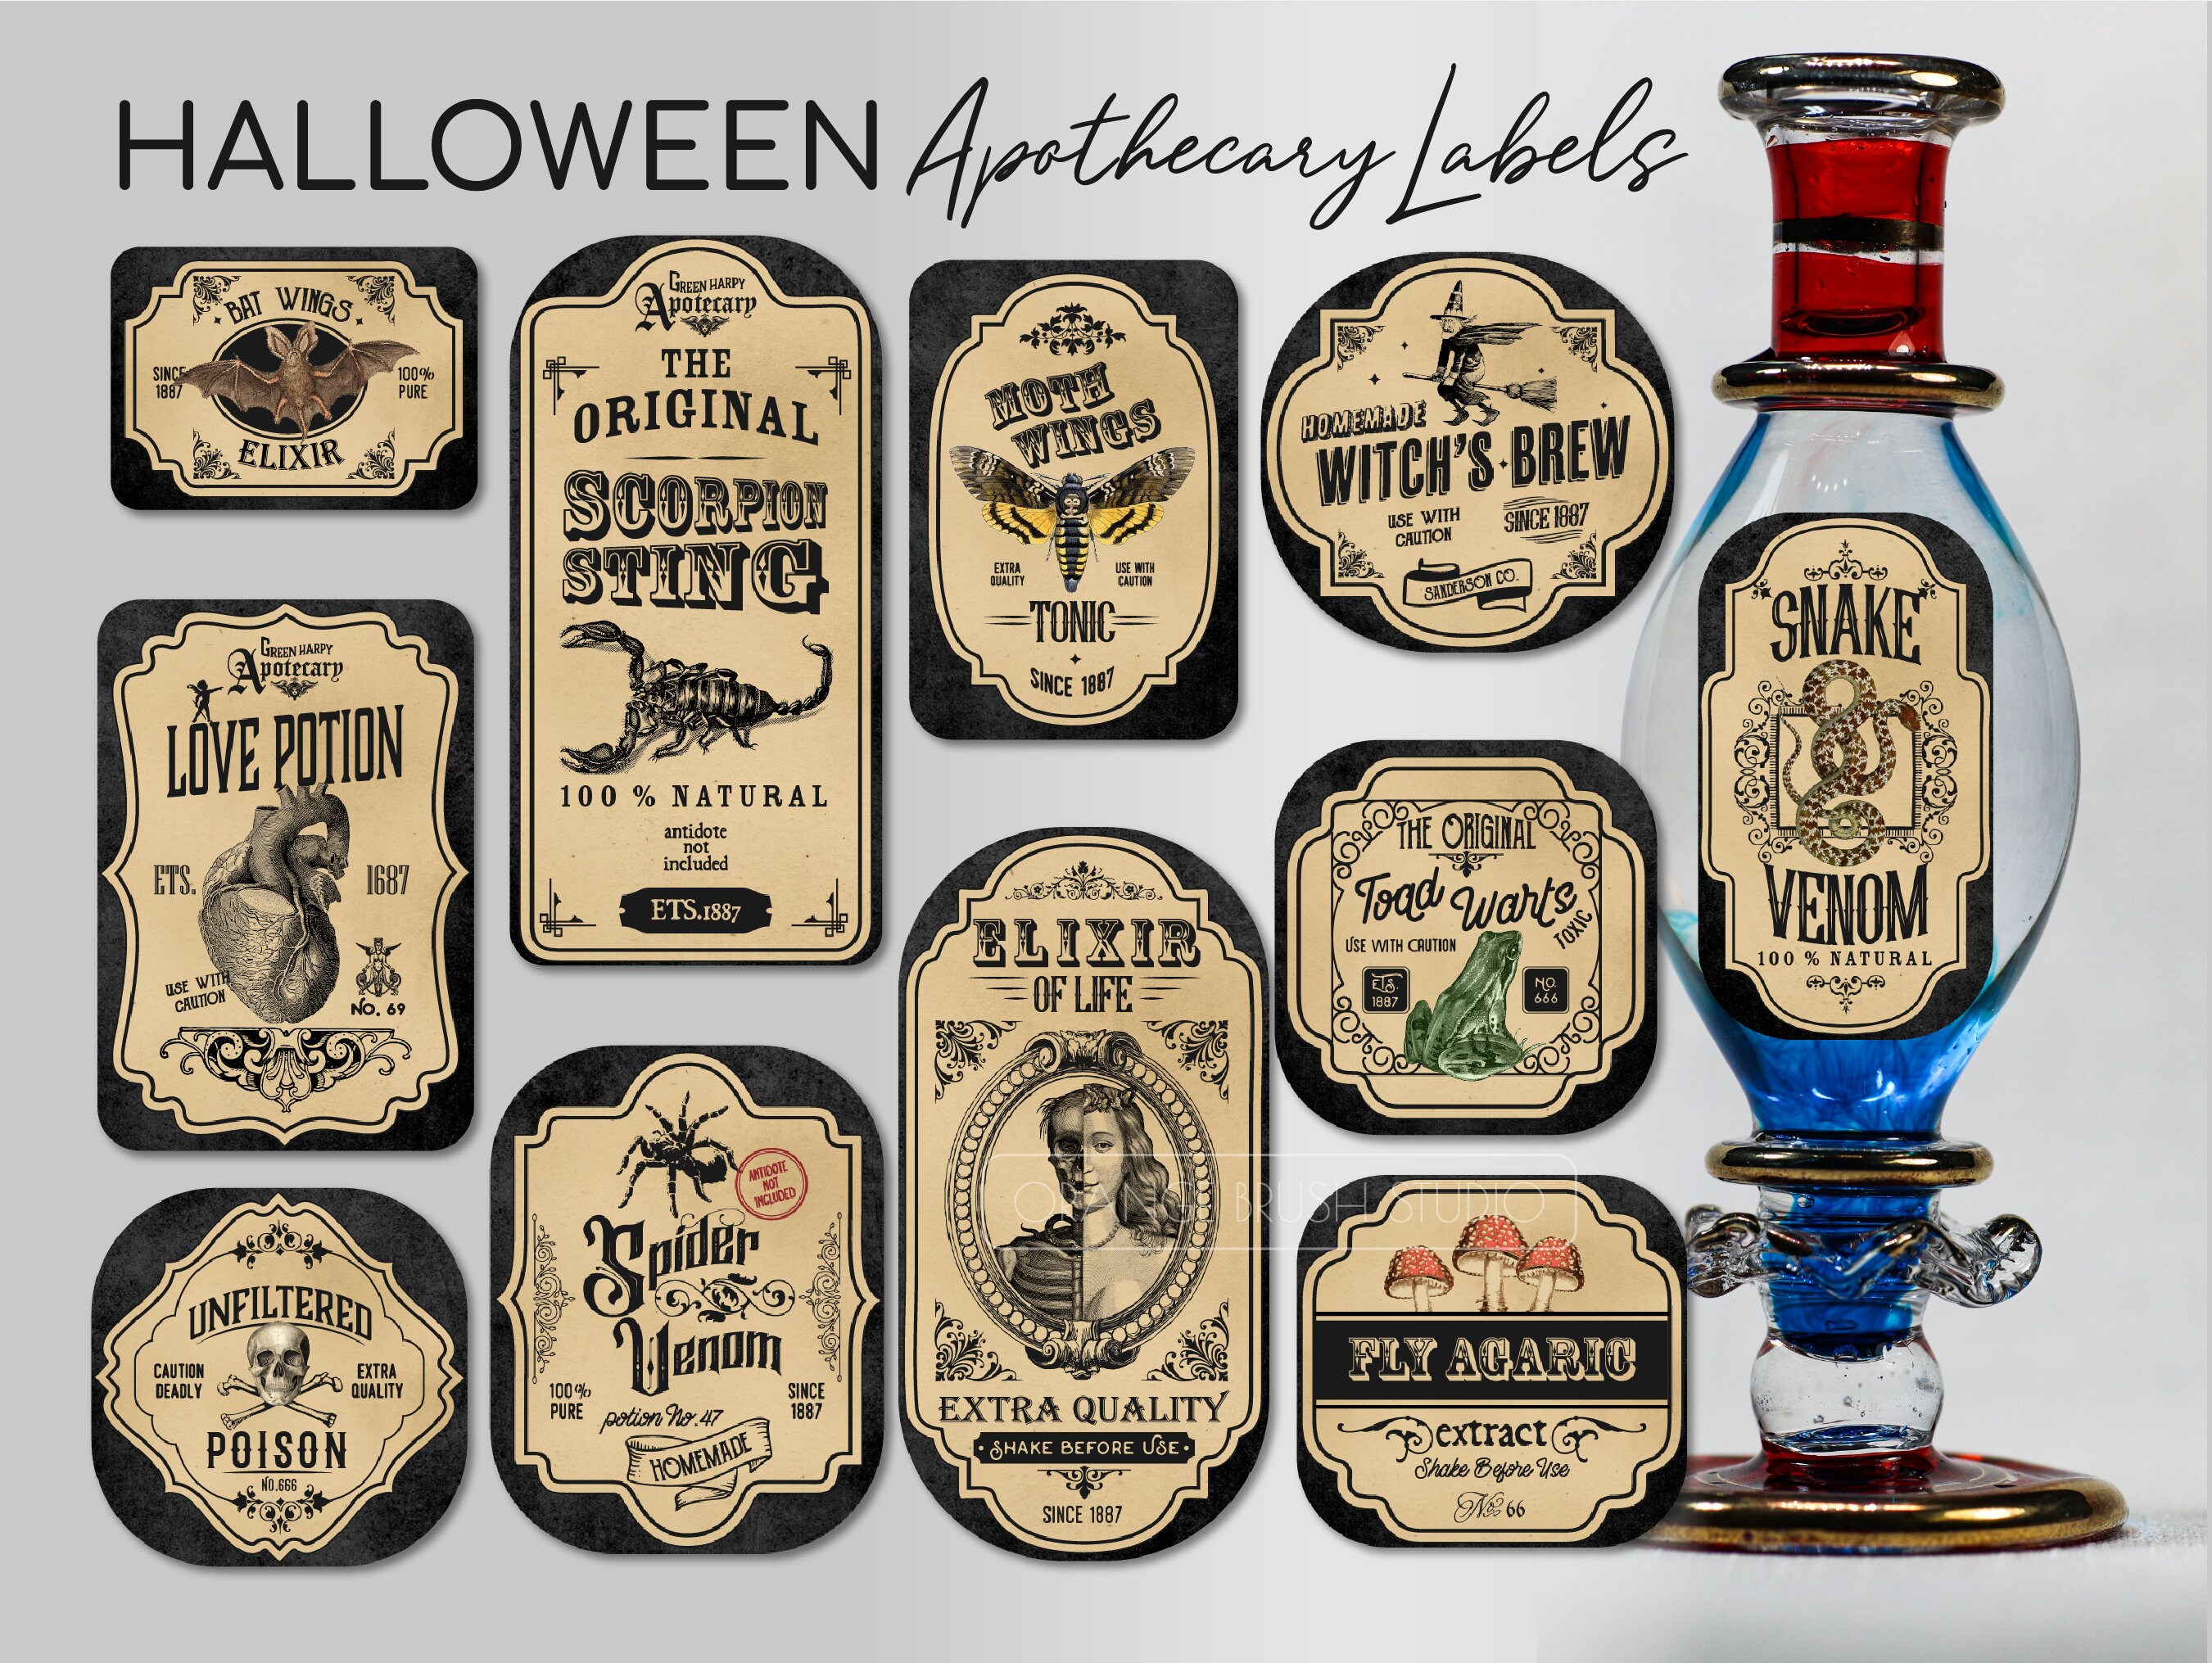 Halloween Apothecary Stickers Bundle Graphic by Orange Brush